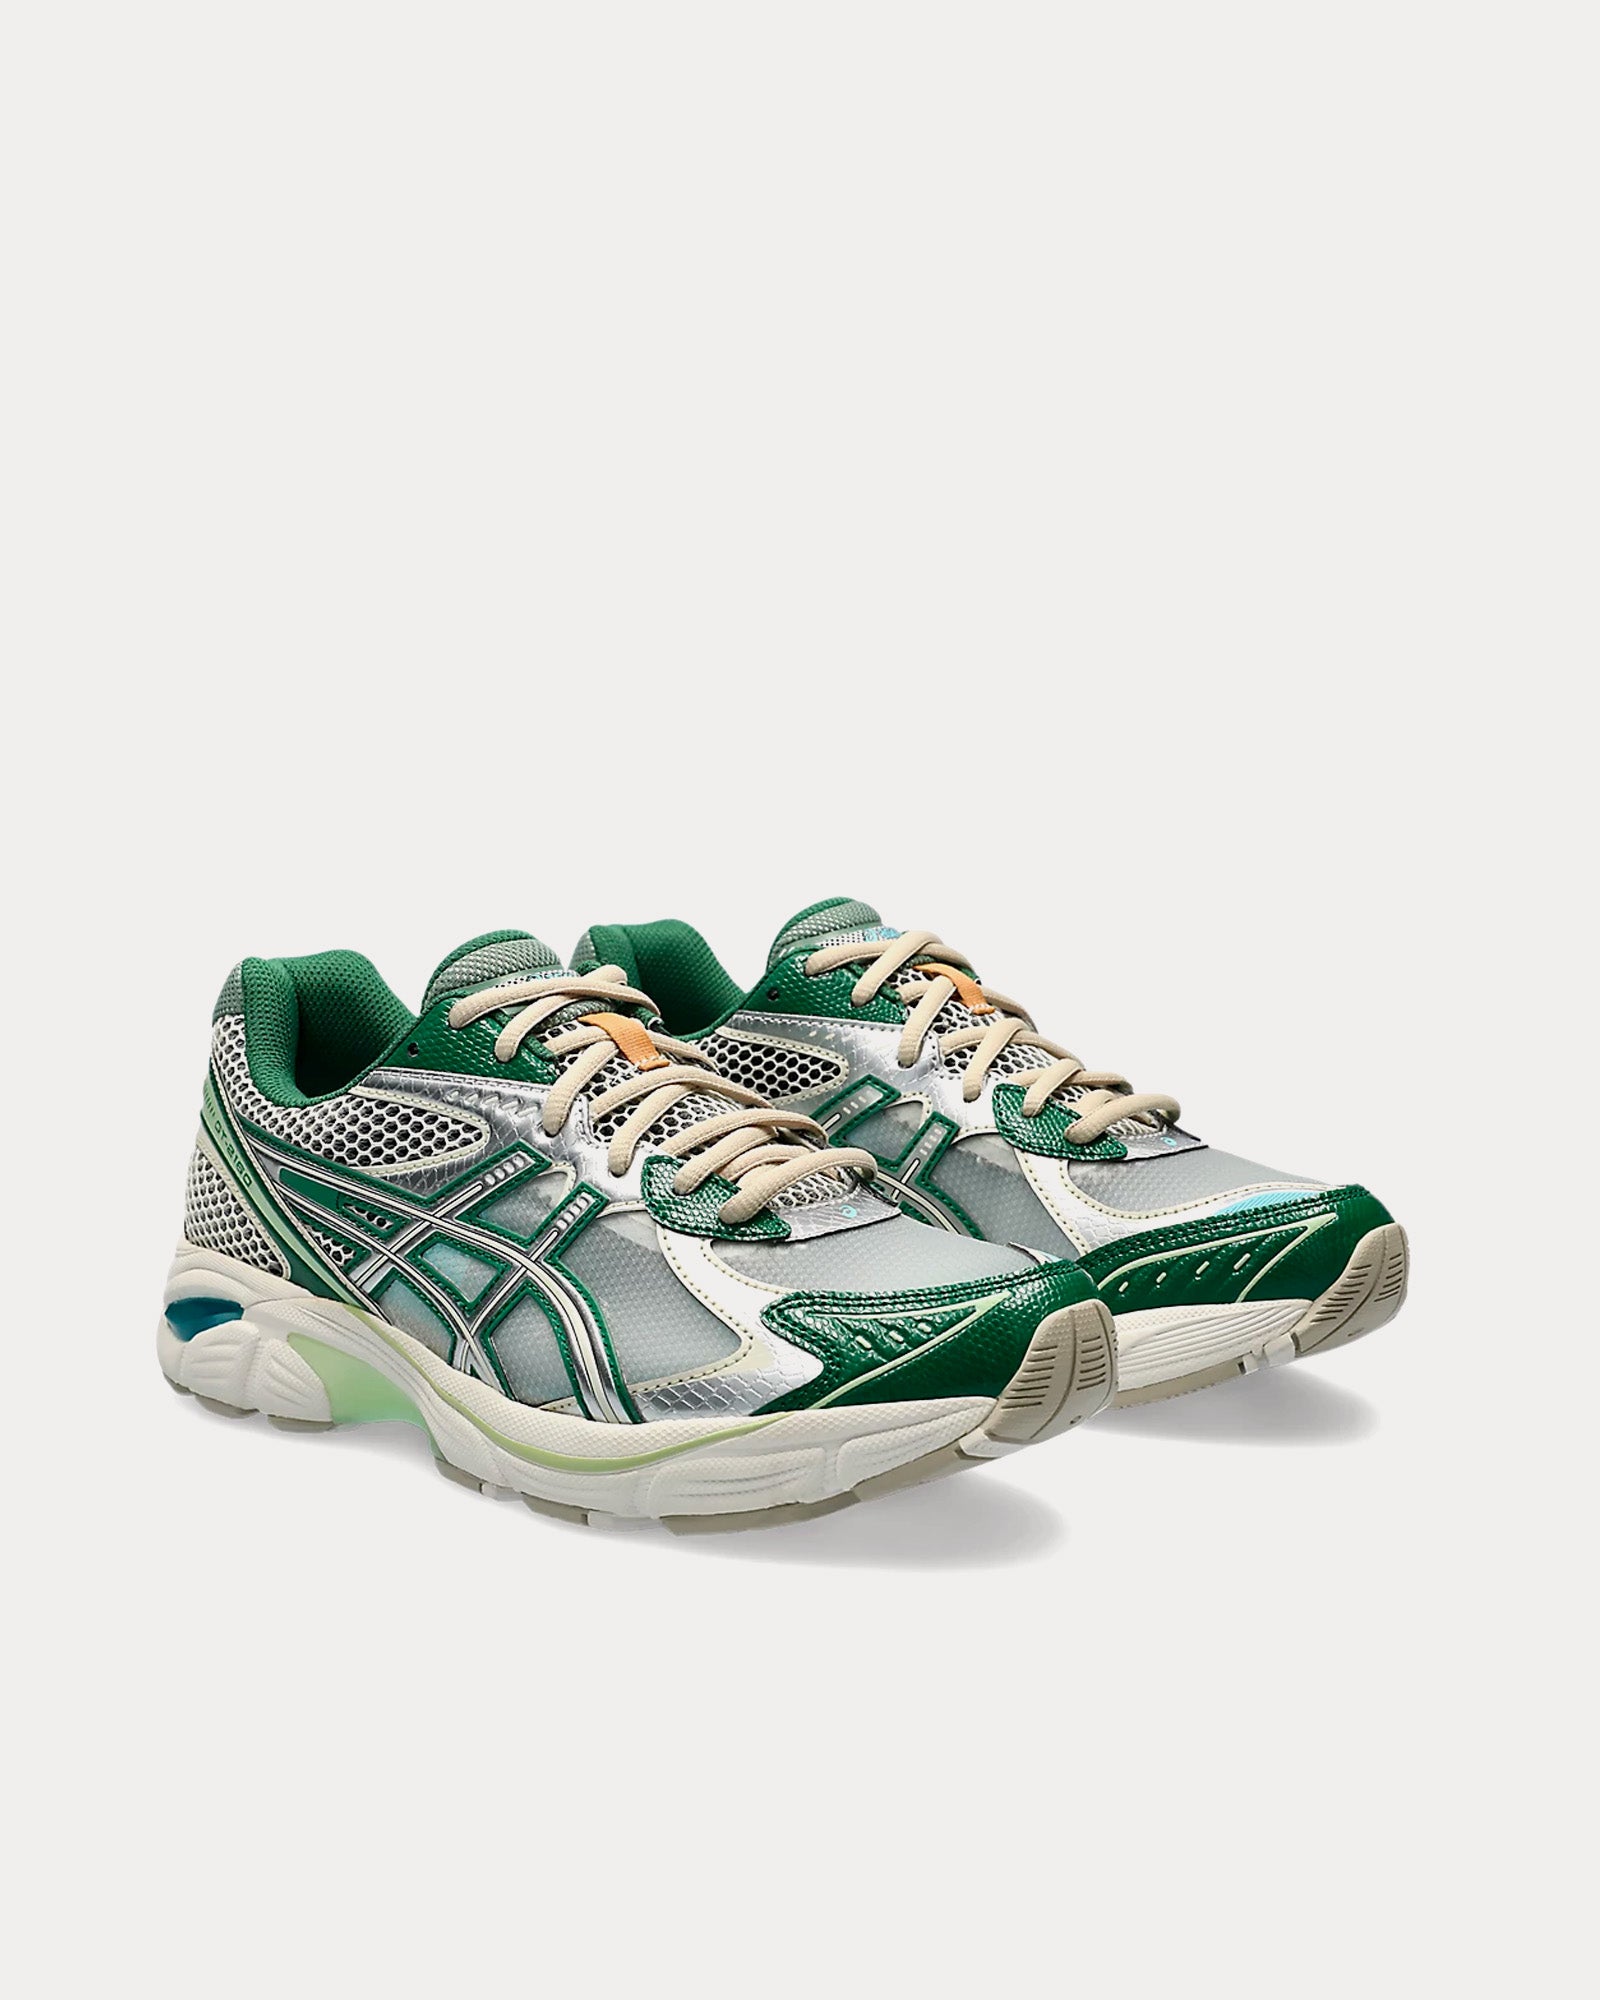 Asics x Above the Clouds - GT-2160 Cream / Shamrock Green Low Top Sneakers